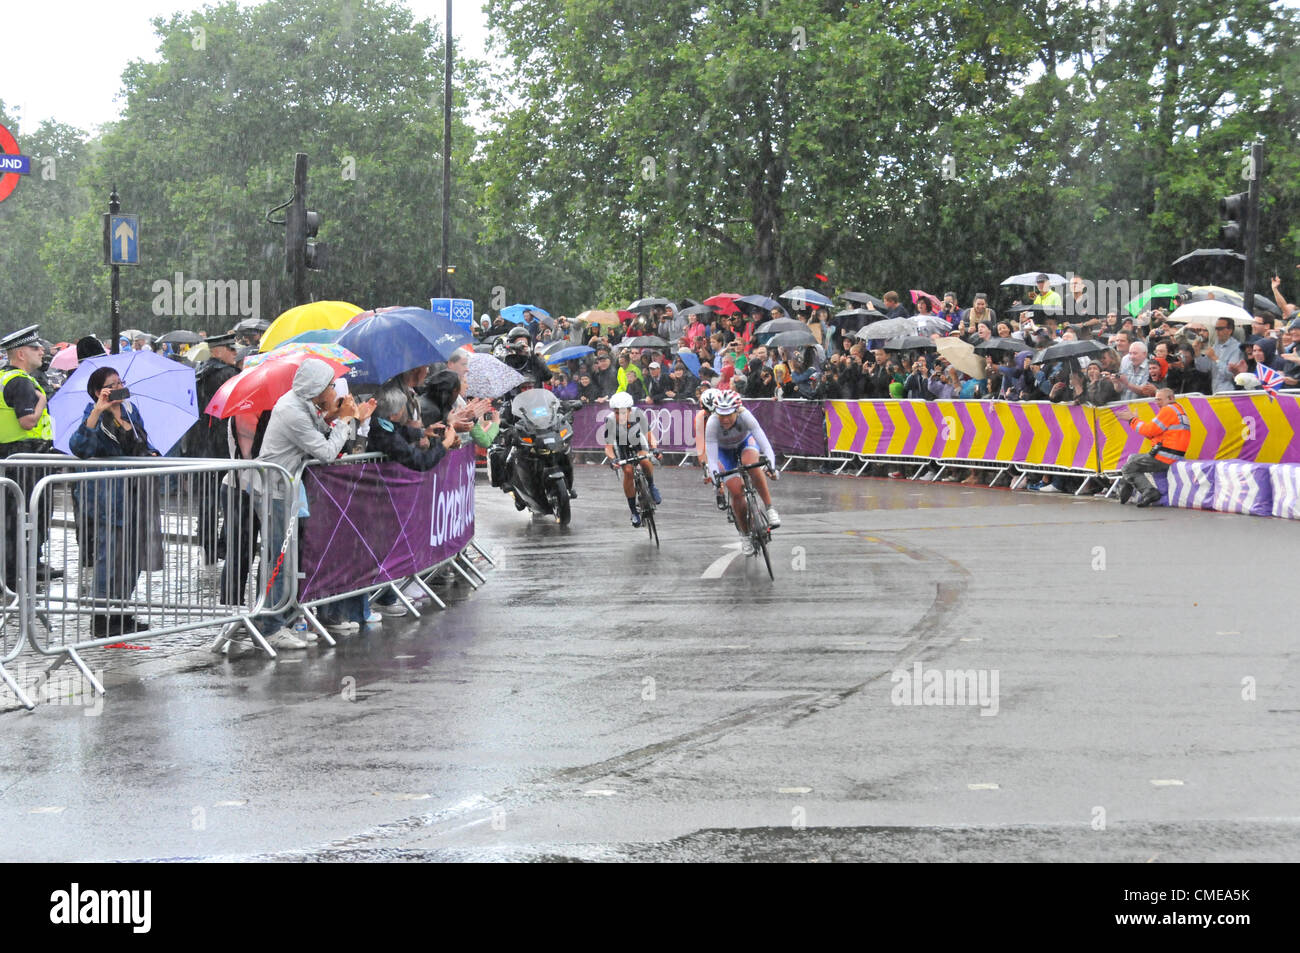 Hyde Park Corner, London, UK. 29th July 2012. The race leaders in the women's cycling road race at Hyde Park Corner approaches the end as the riders and crowd endure heavy rain and a thunderstorm. Stock Photo